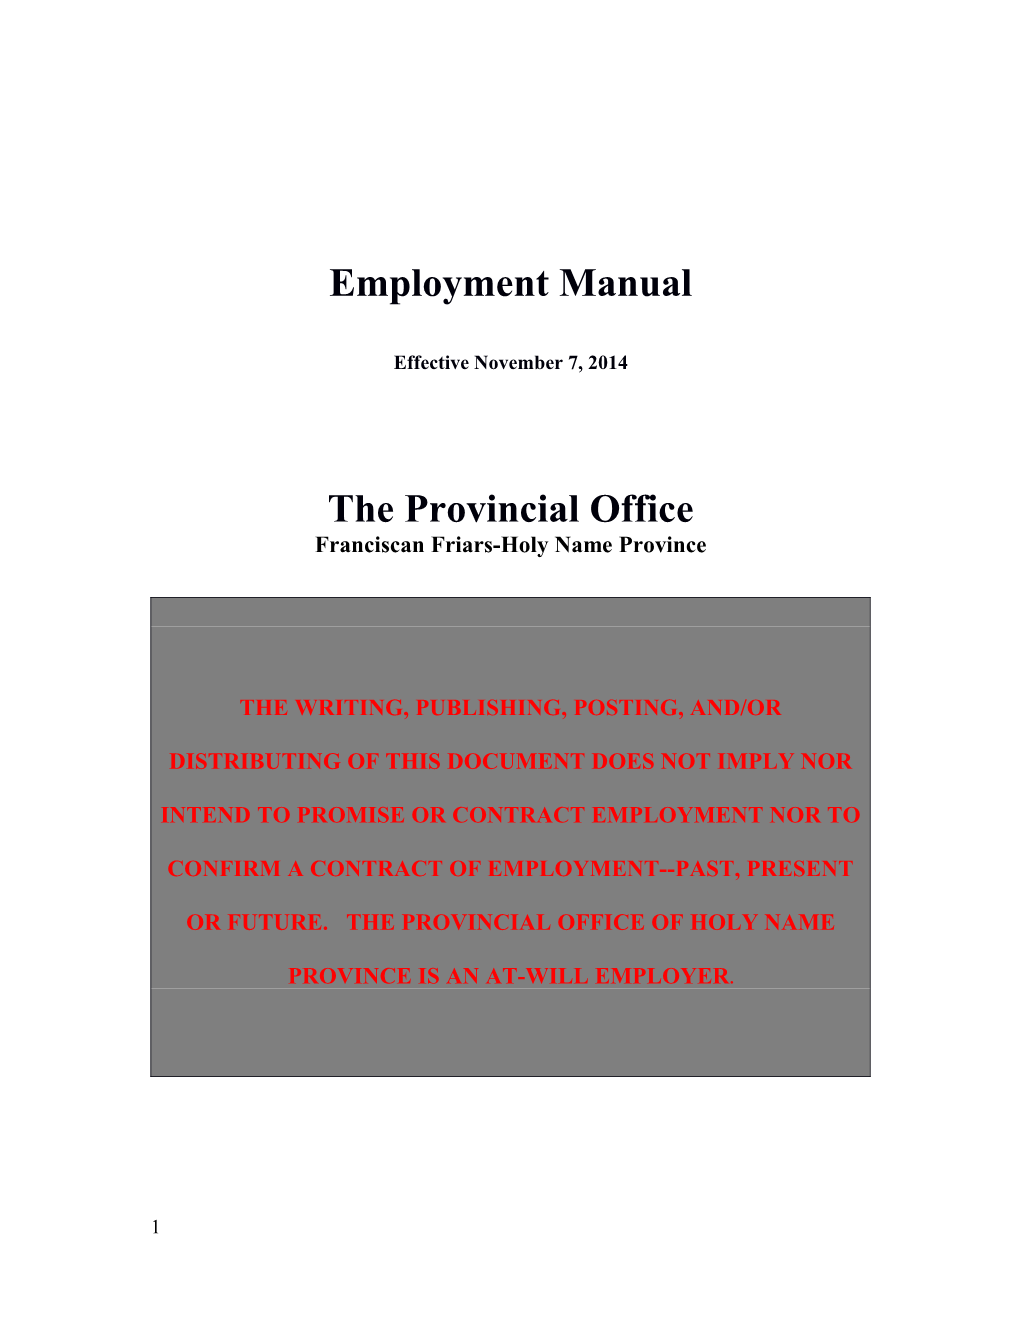 Employee Personnel Policy